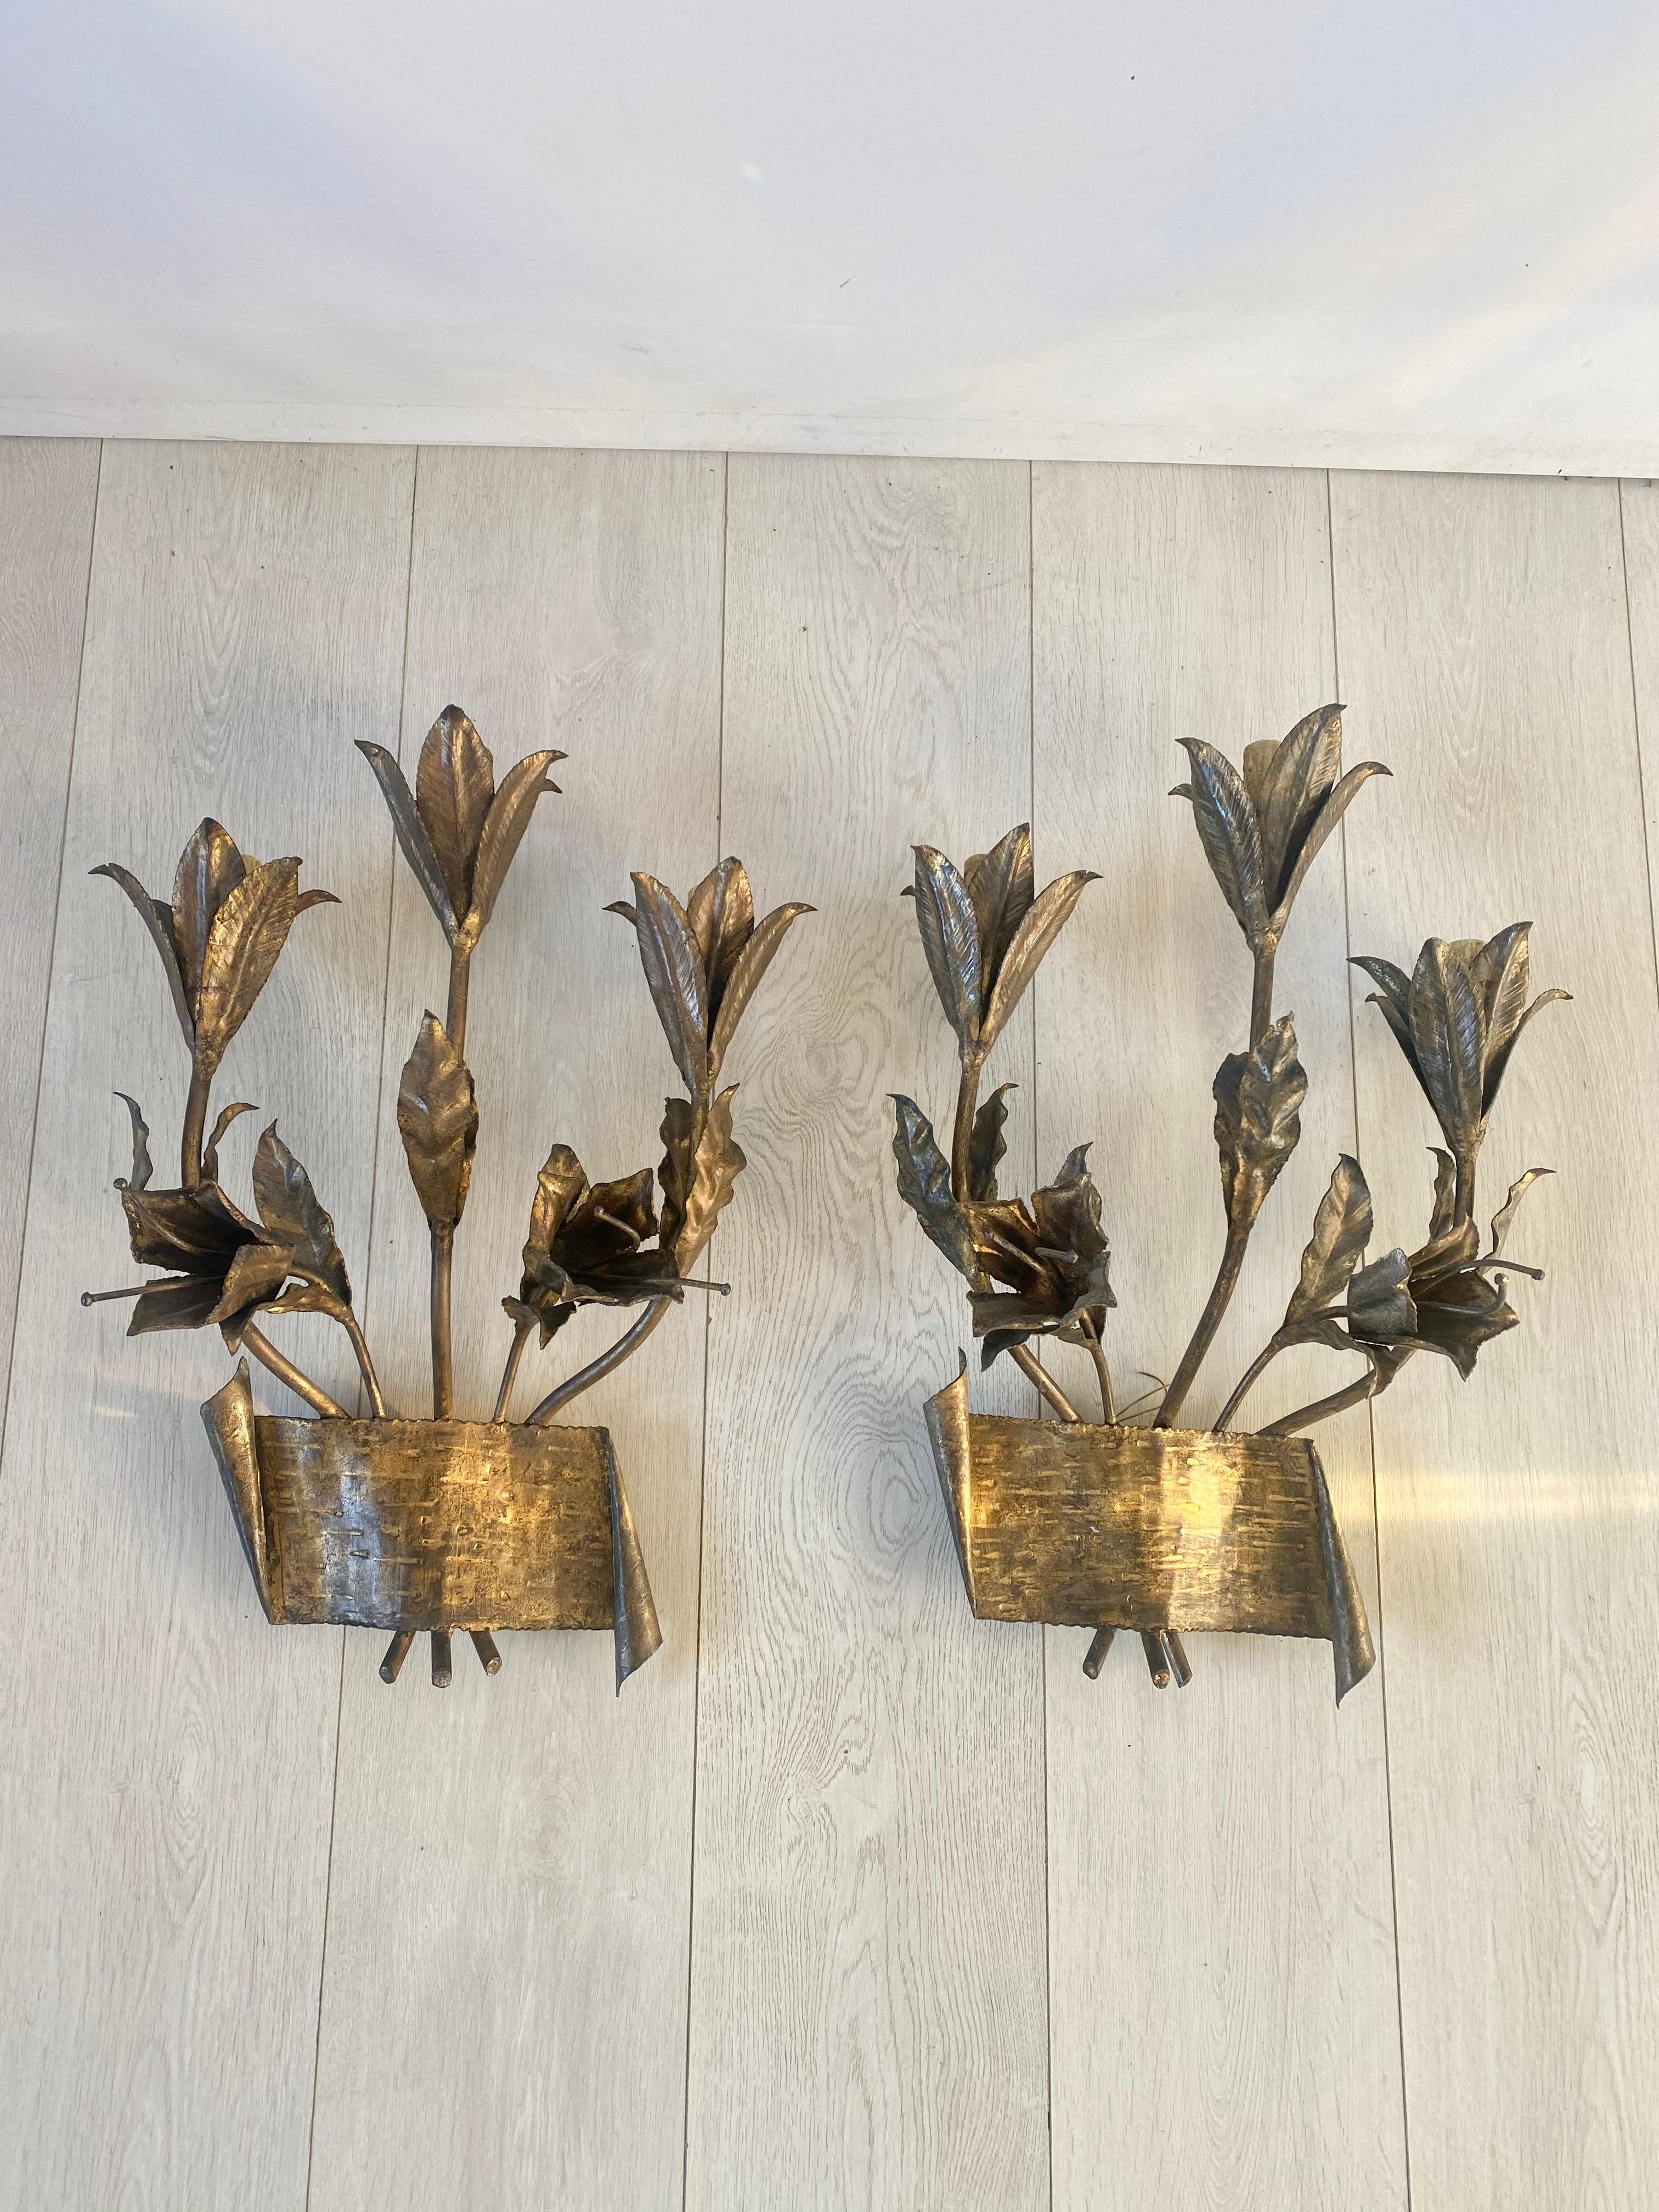 Beautiful pair of gilt metal wall sconces from Spain c1950

3 lights per sconce set within the top 3 flowers

Measure 52cm tall, 33cm wide and 21cm deep.